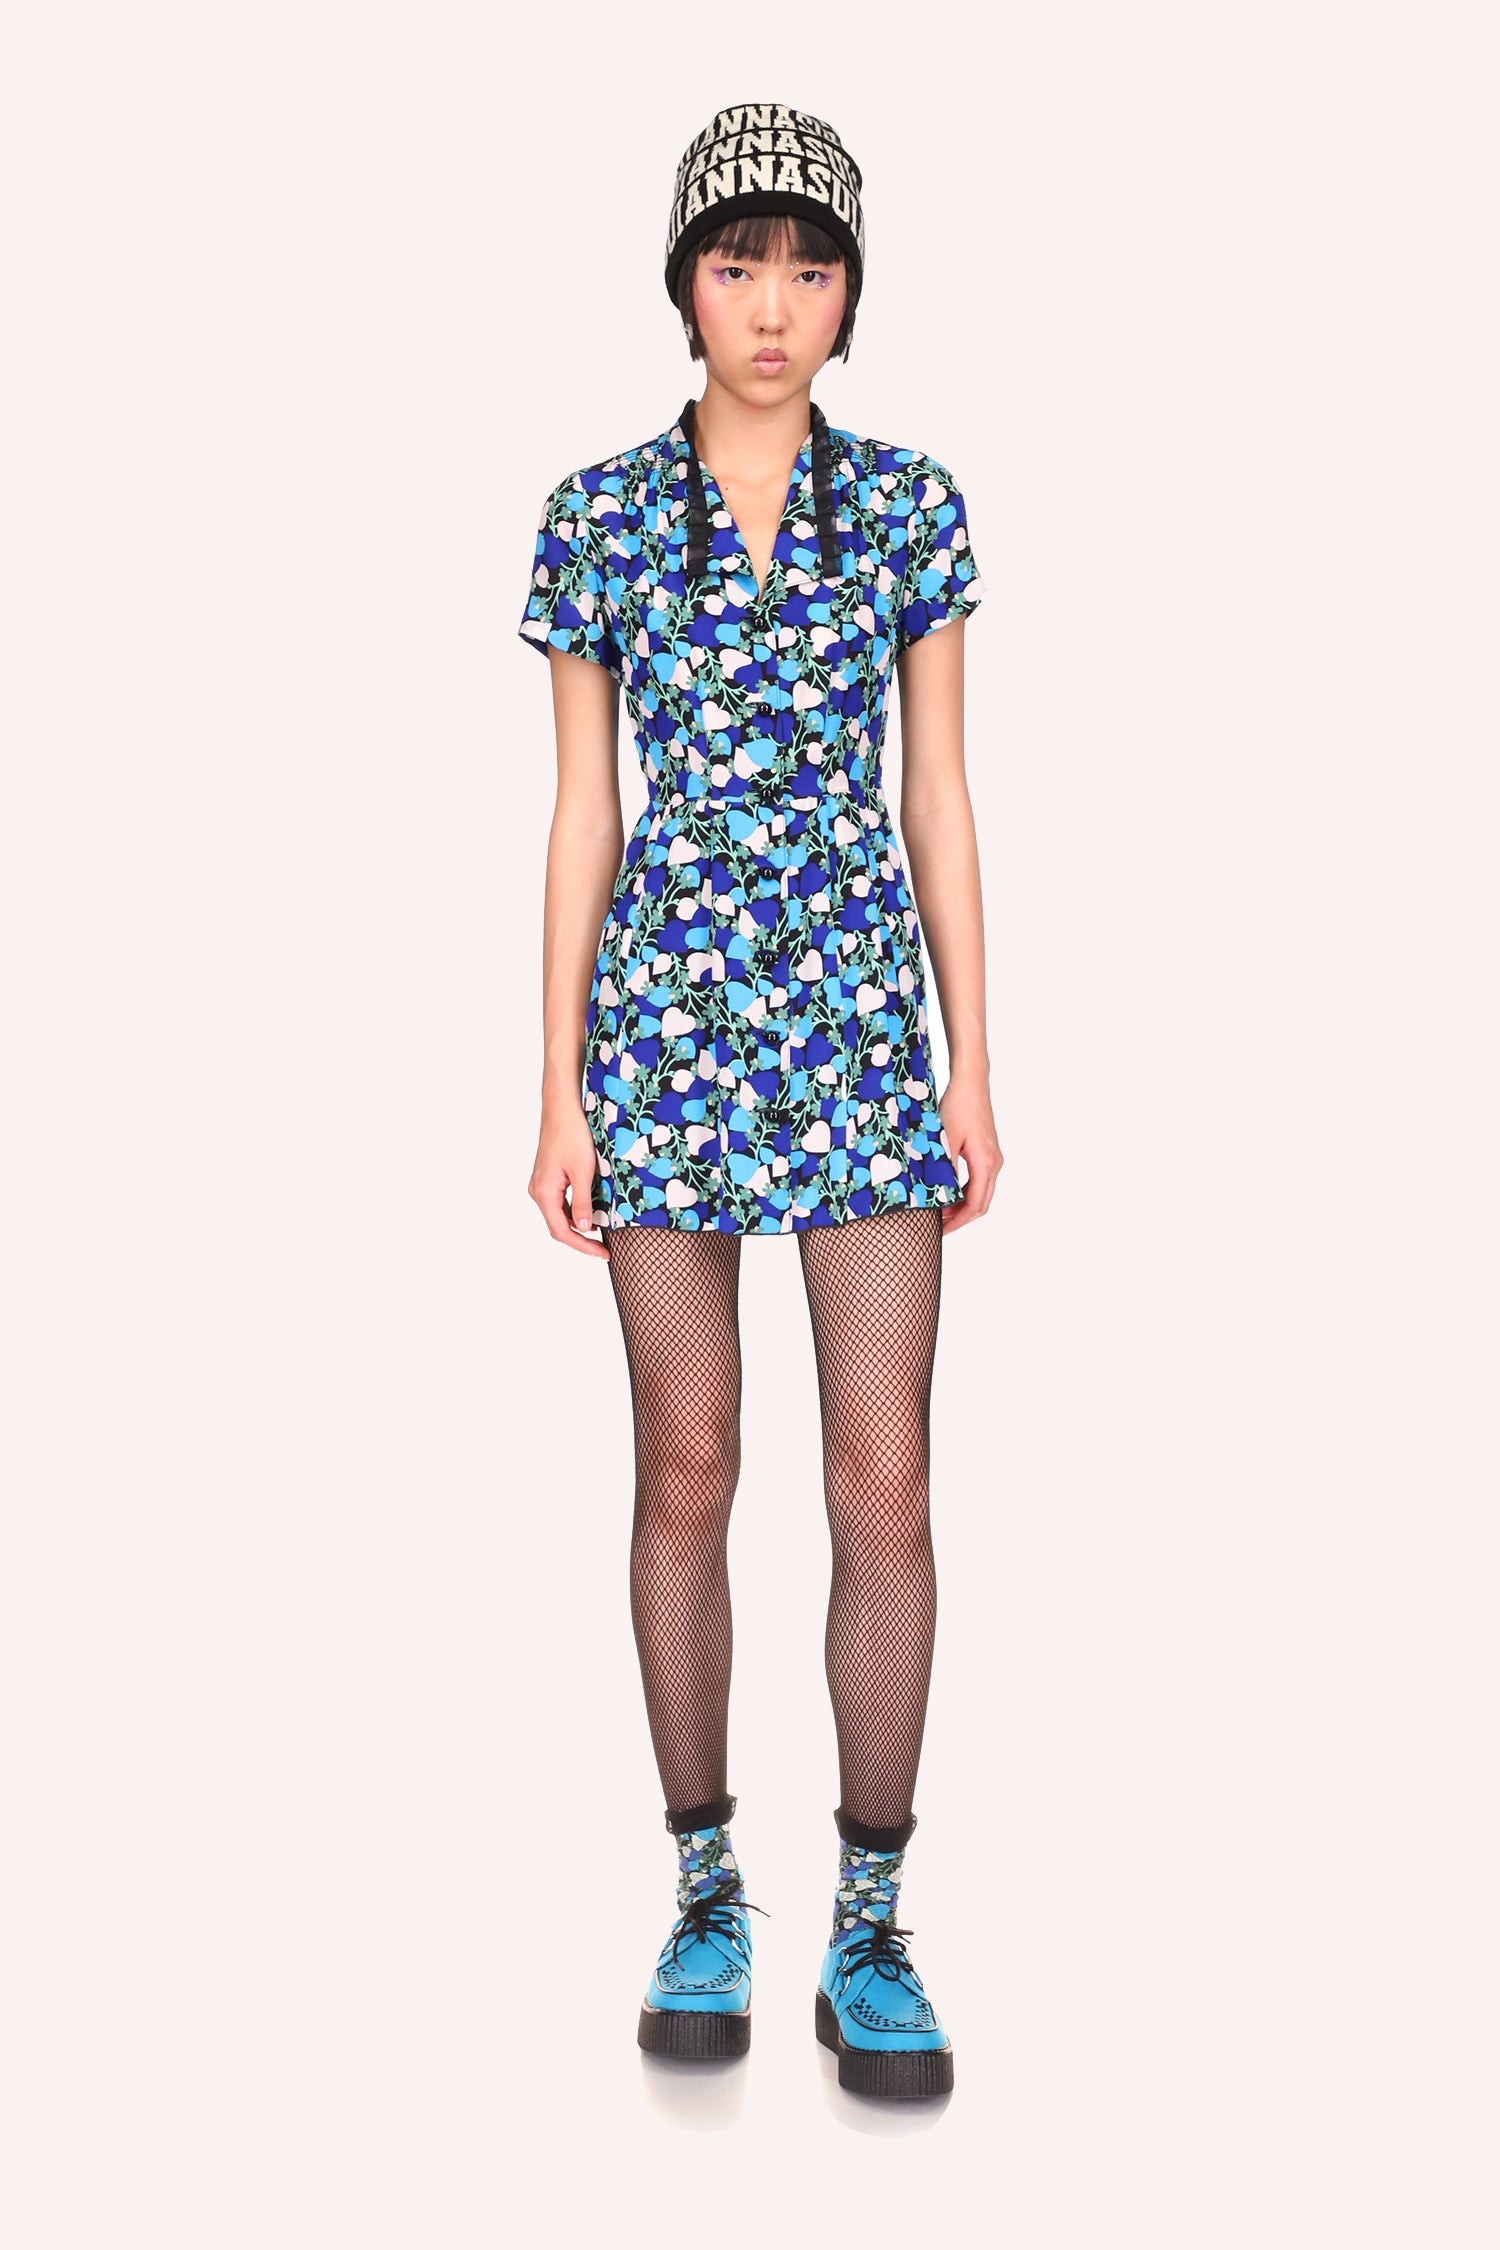 Blooming Hearts Dress Cornflower, mid-thigh mini dress, shoulder-covering sleeves, V-neckline with flap, 7-button